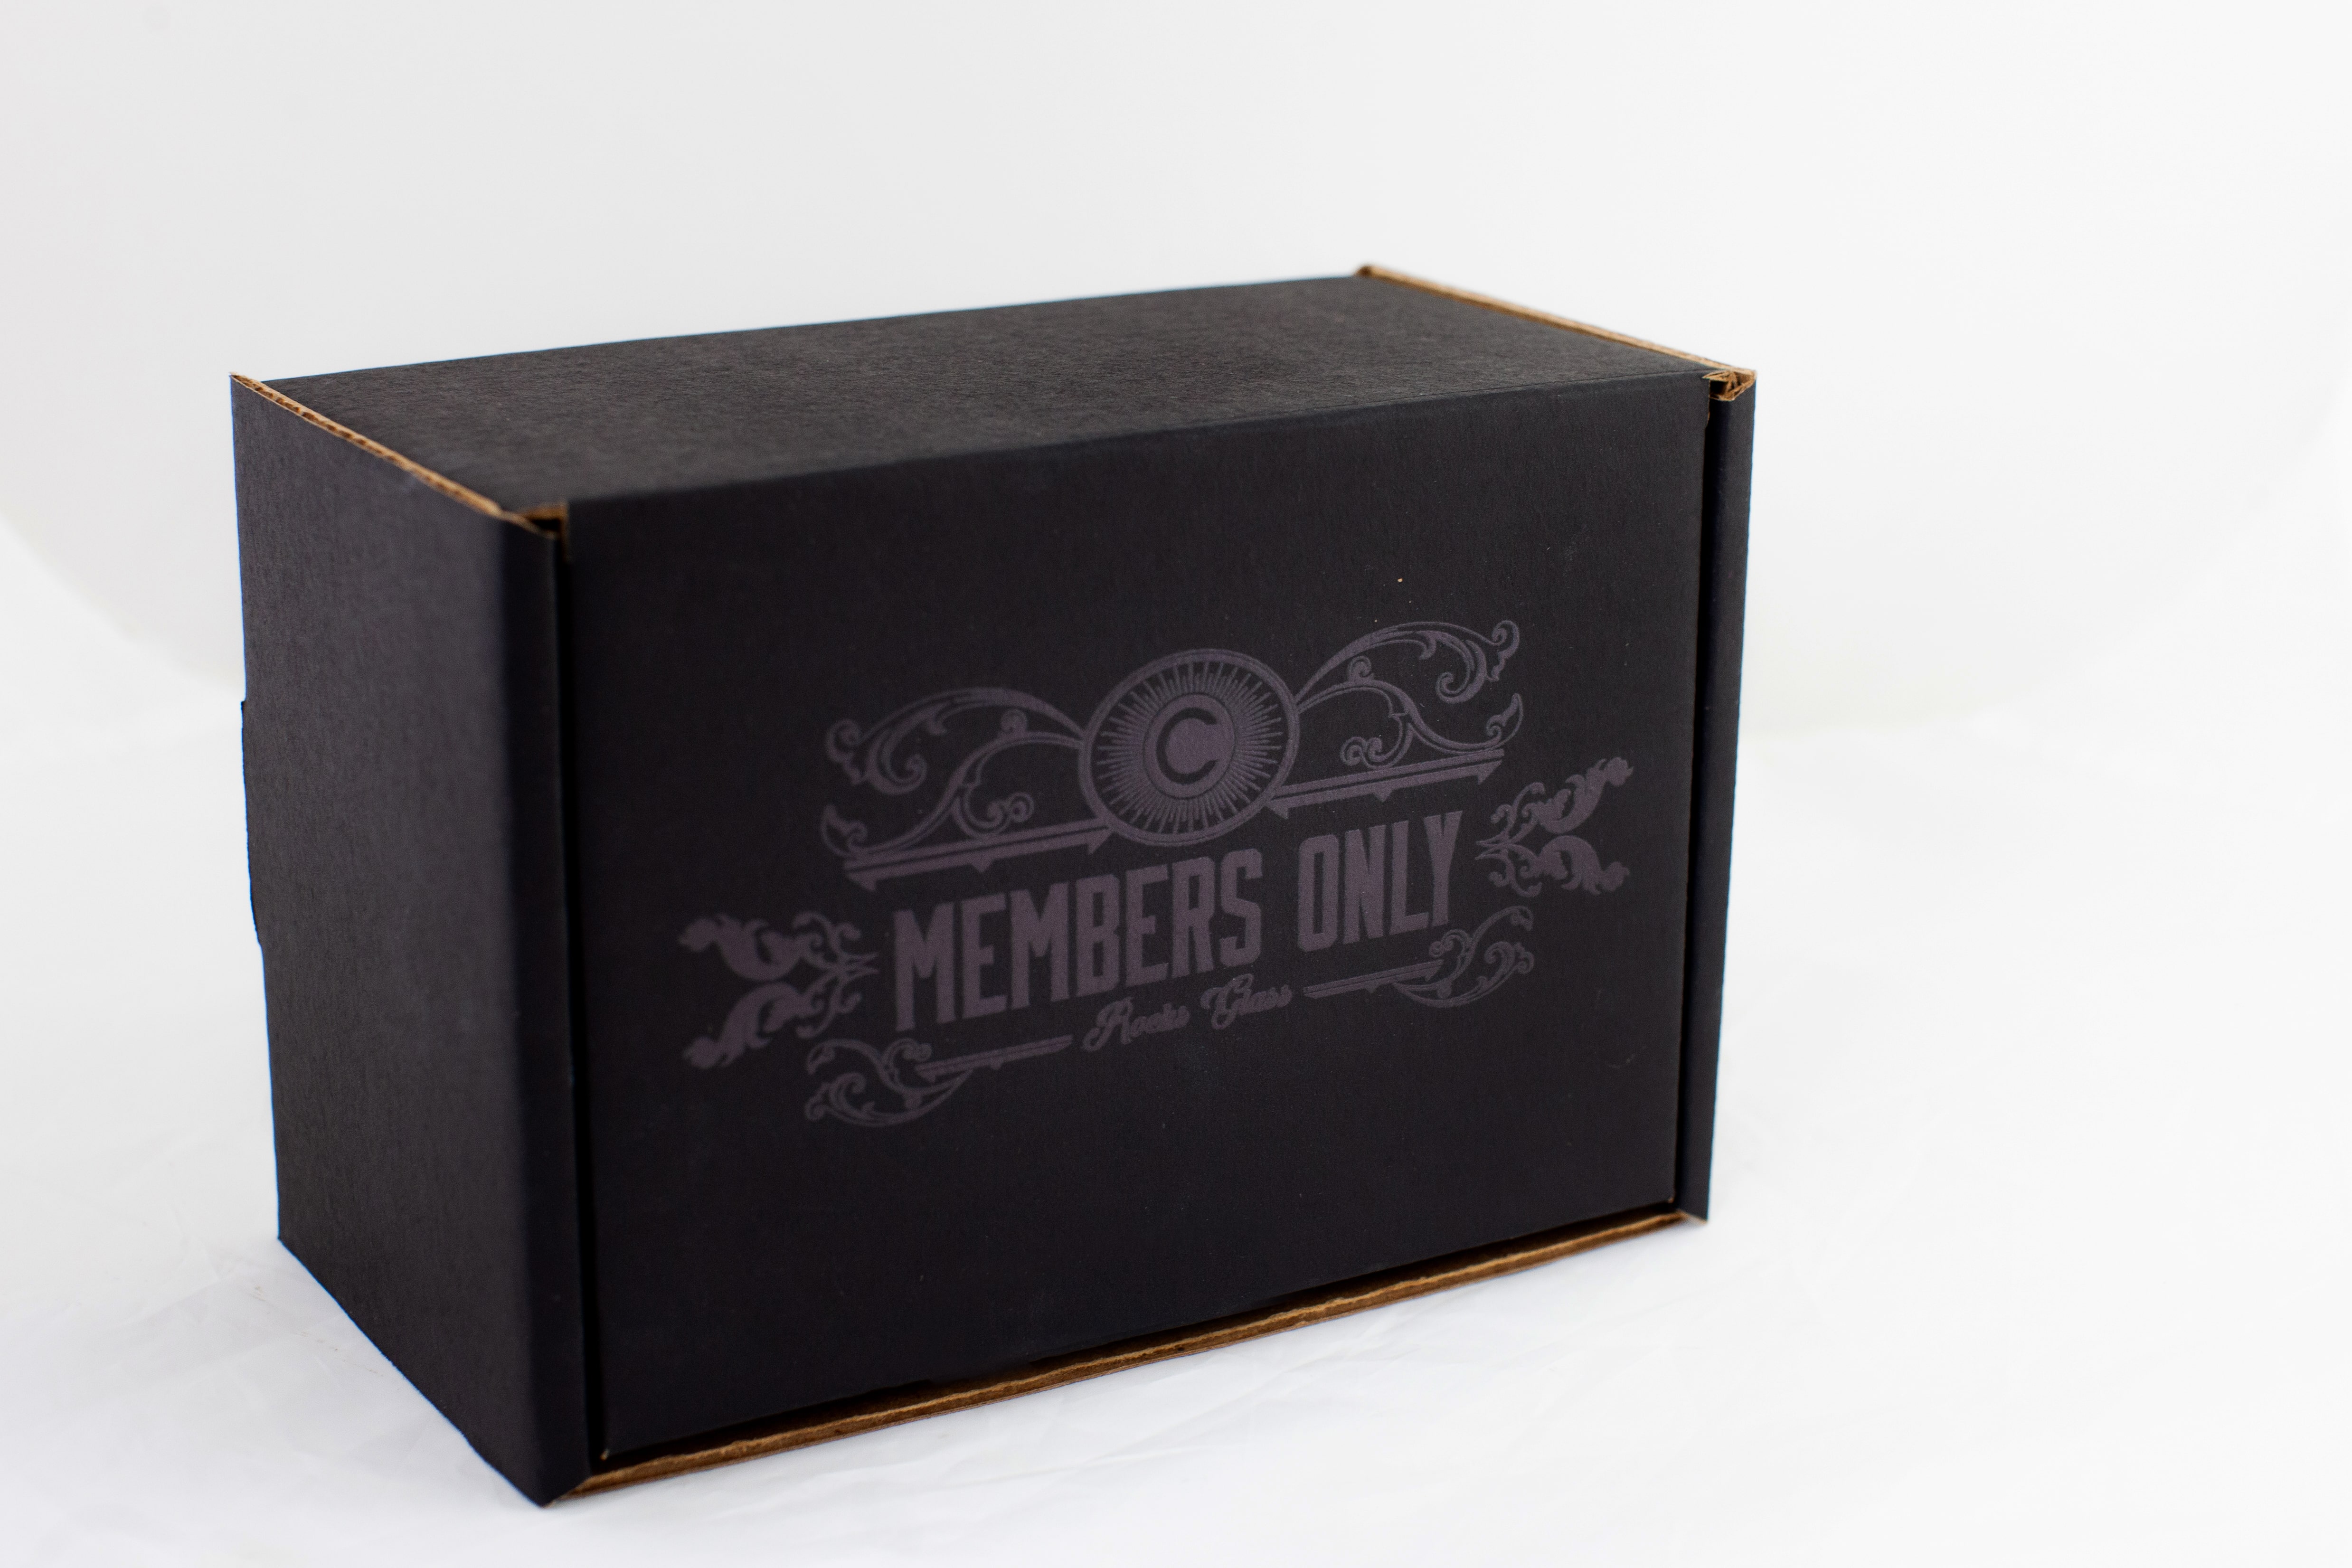 Members Only Box Example